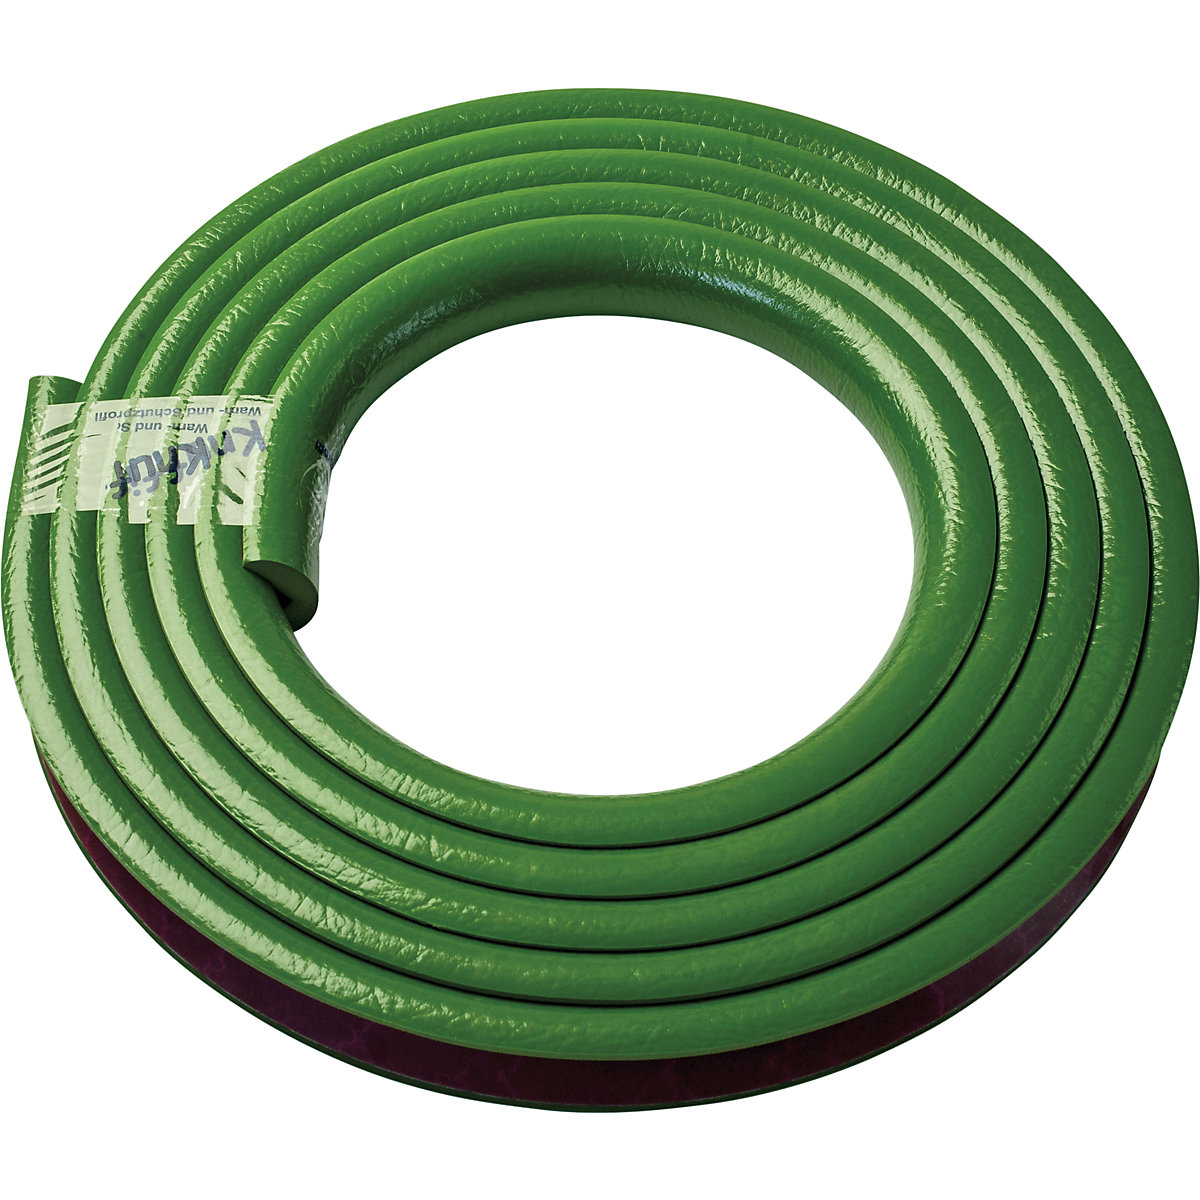 Knuffi® corner protection – SHG, type A, 1 x 5 m roll, green-21